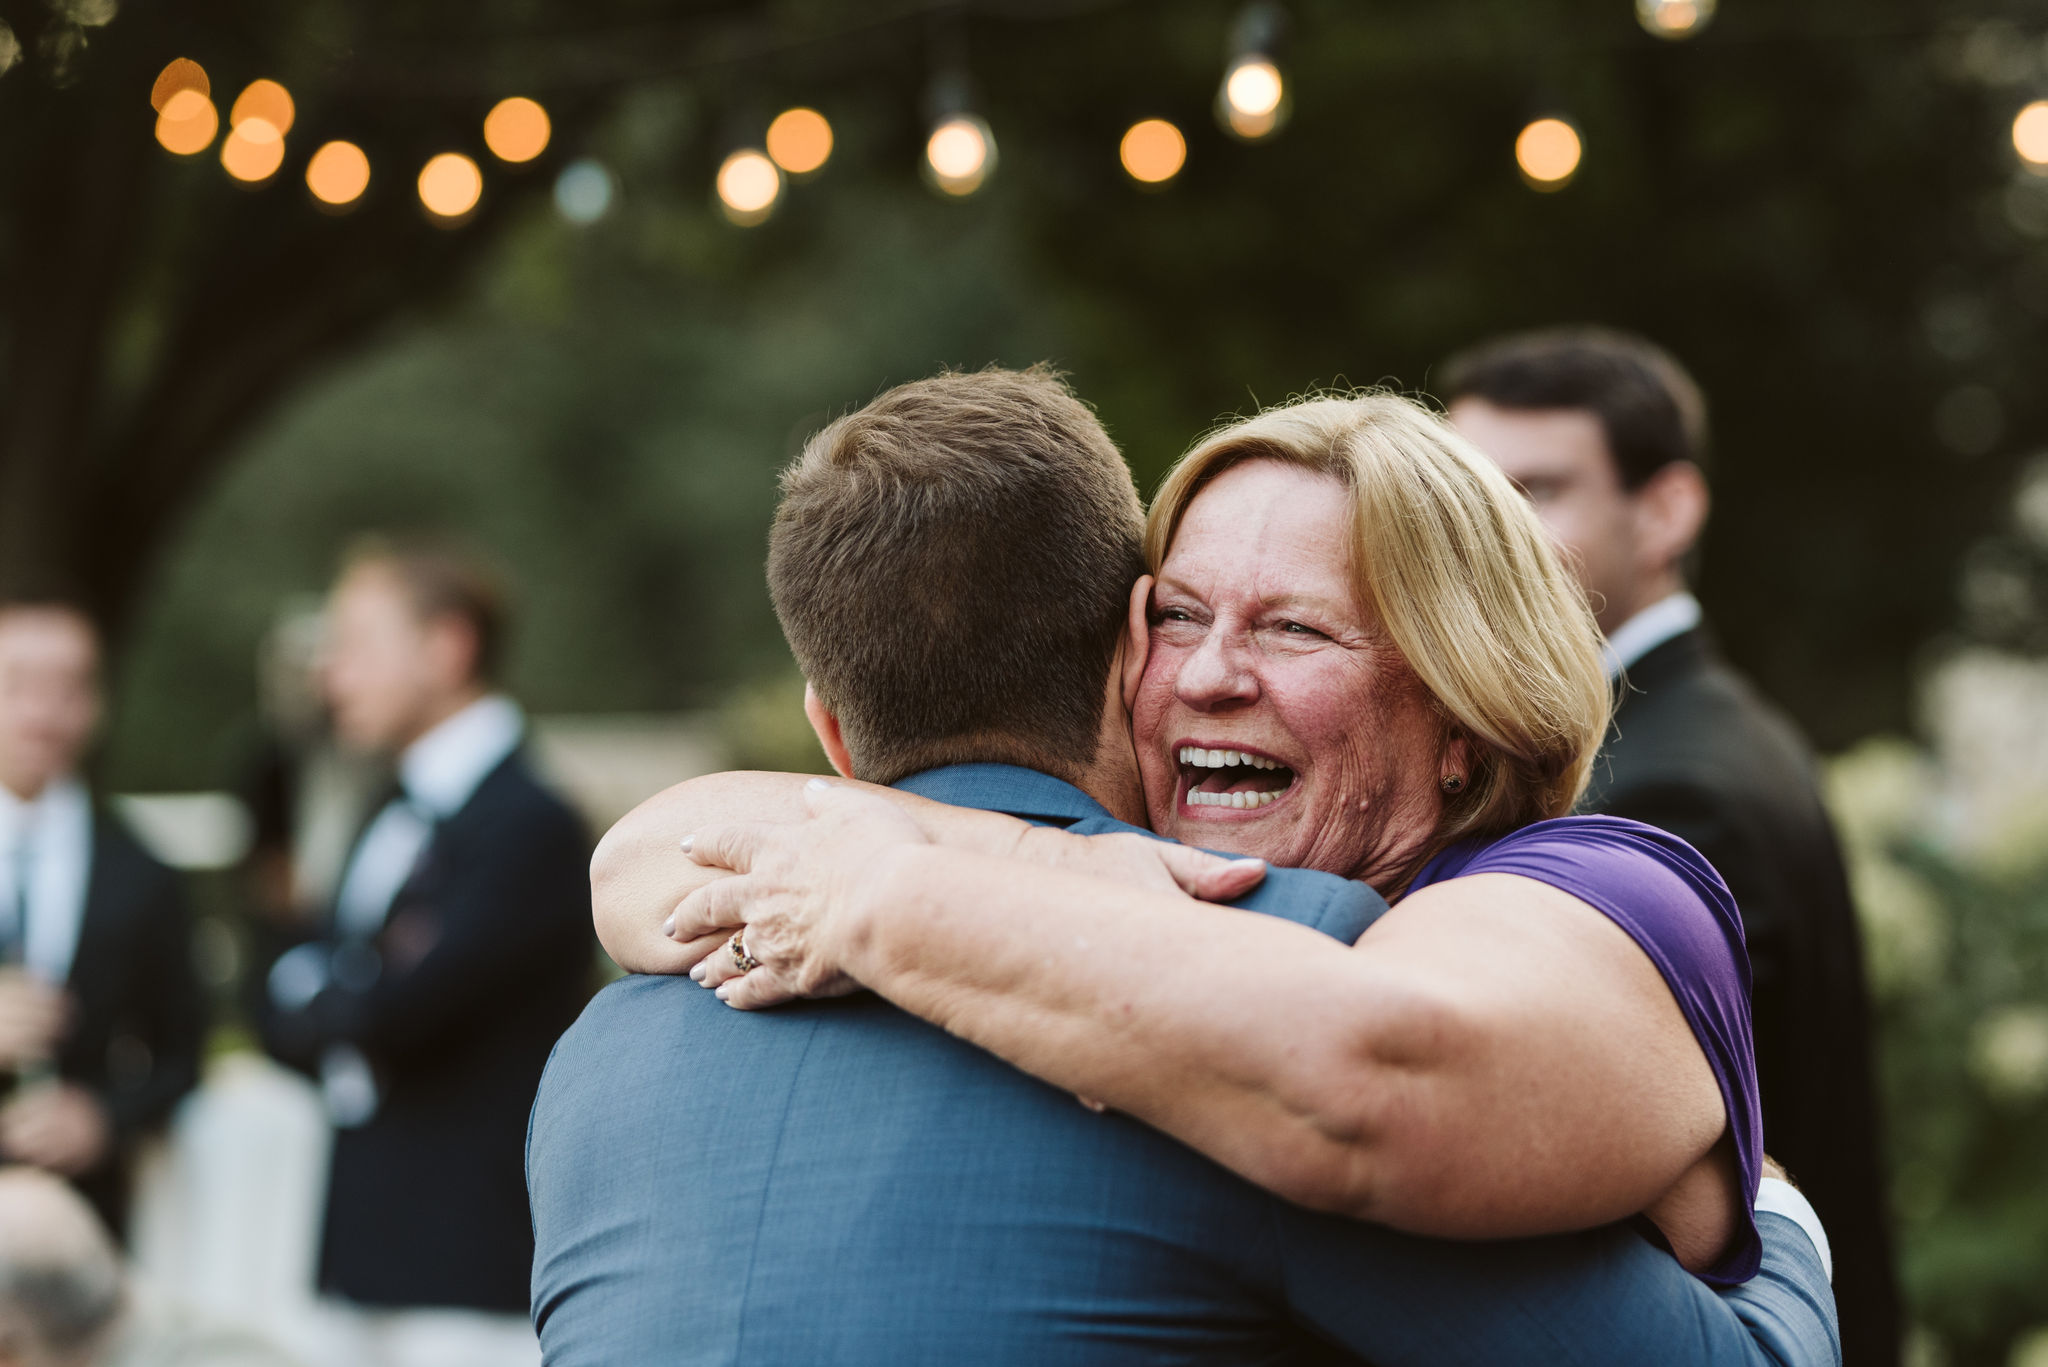  Phoenix Maryland, Baltimore Wedding Photographer, Eagle’s Nest Country Club, Classic, Romantic, Family Hugging Groom, Wedding Guests Congratulating Groom 